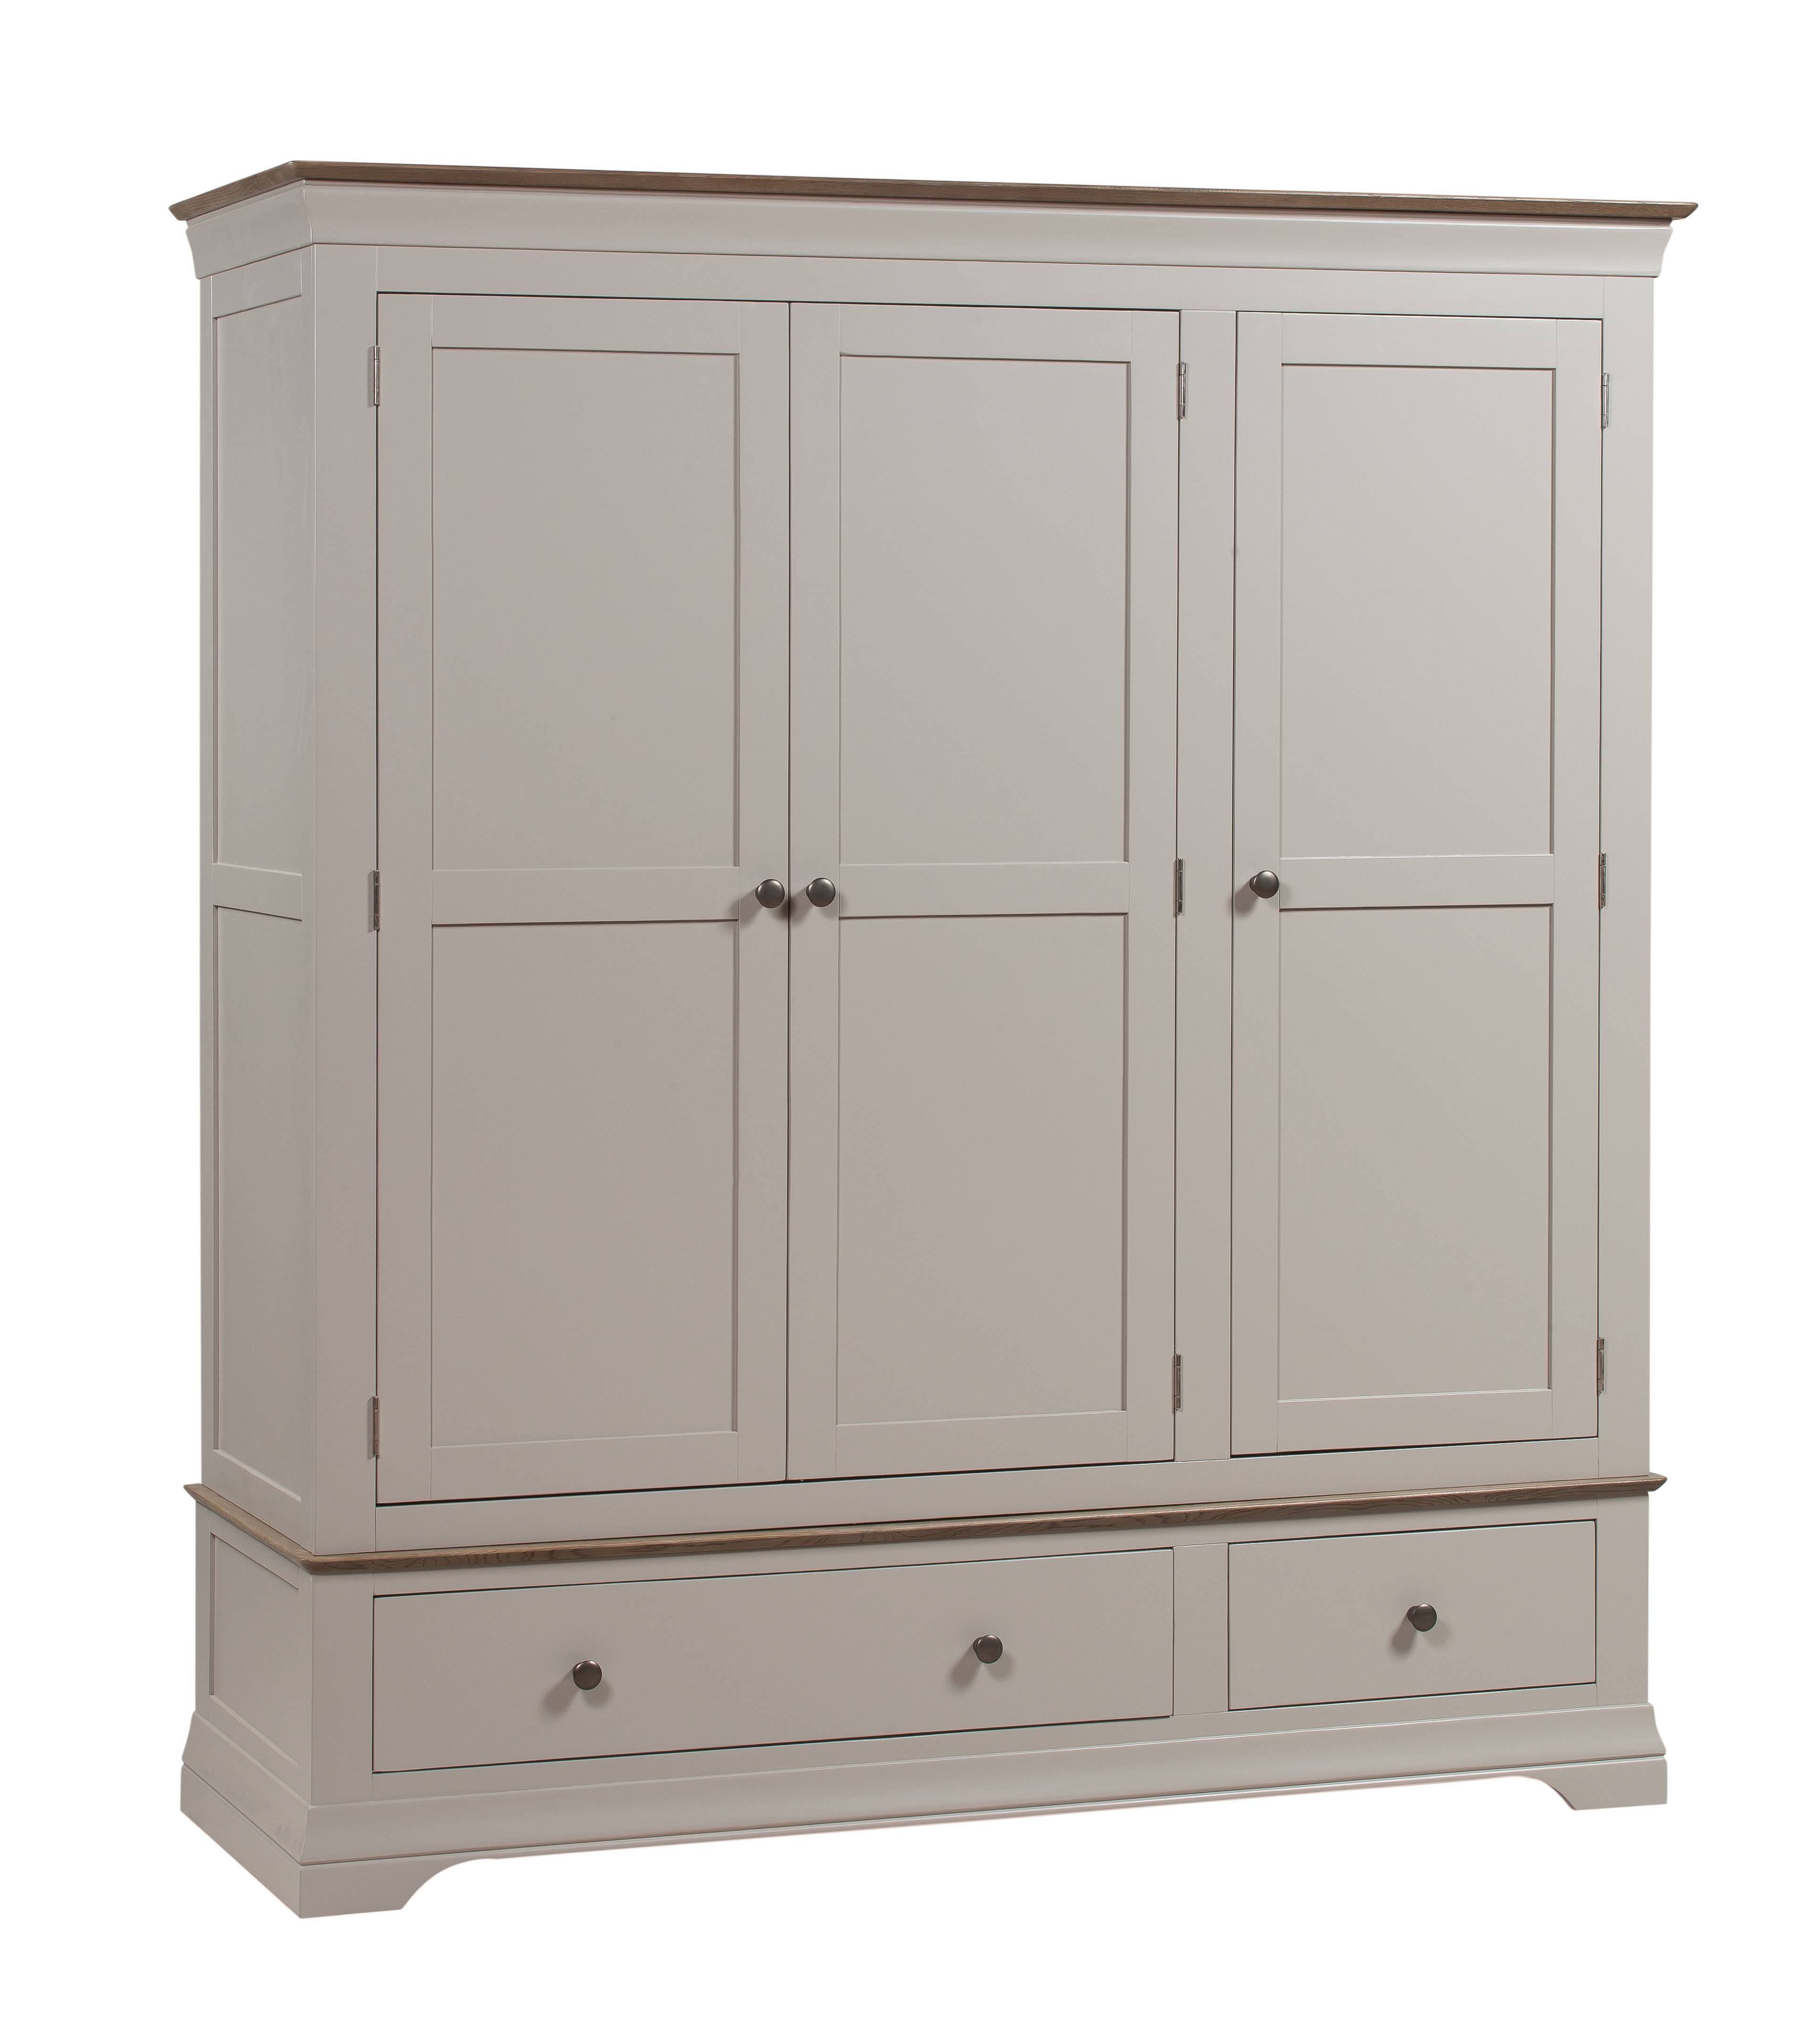 Emsworth Grey Painted Triple Wardrobe With Drawers Pertaining To Triple Wardrobes With Drawers (View 11 of 15)